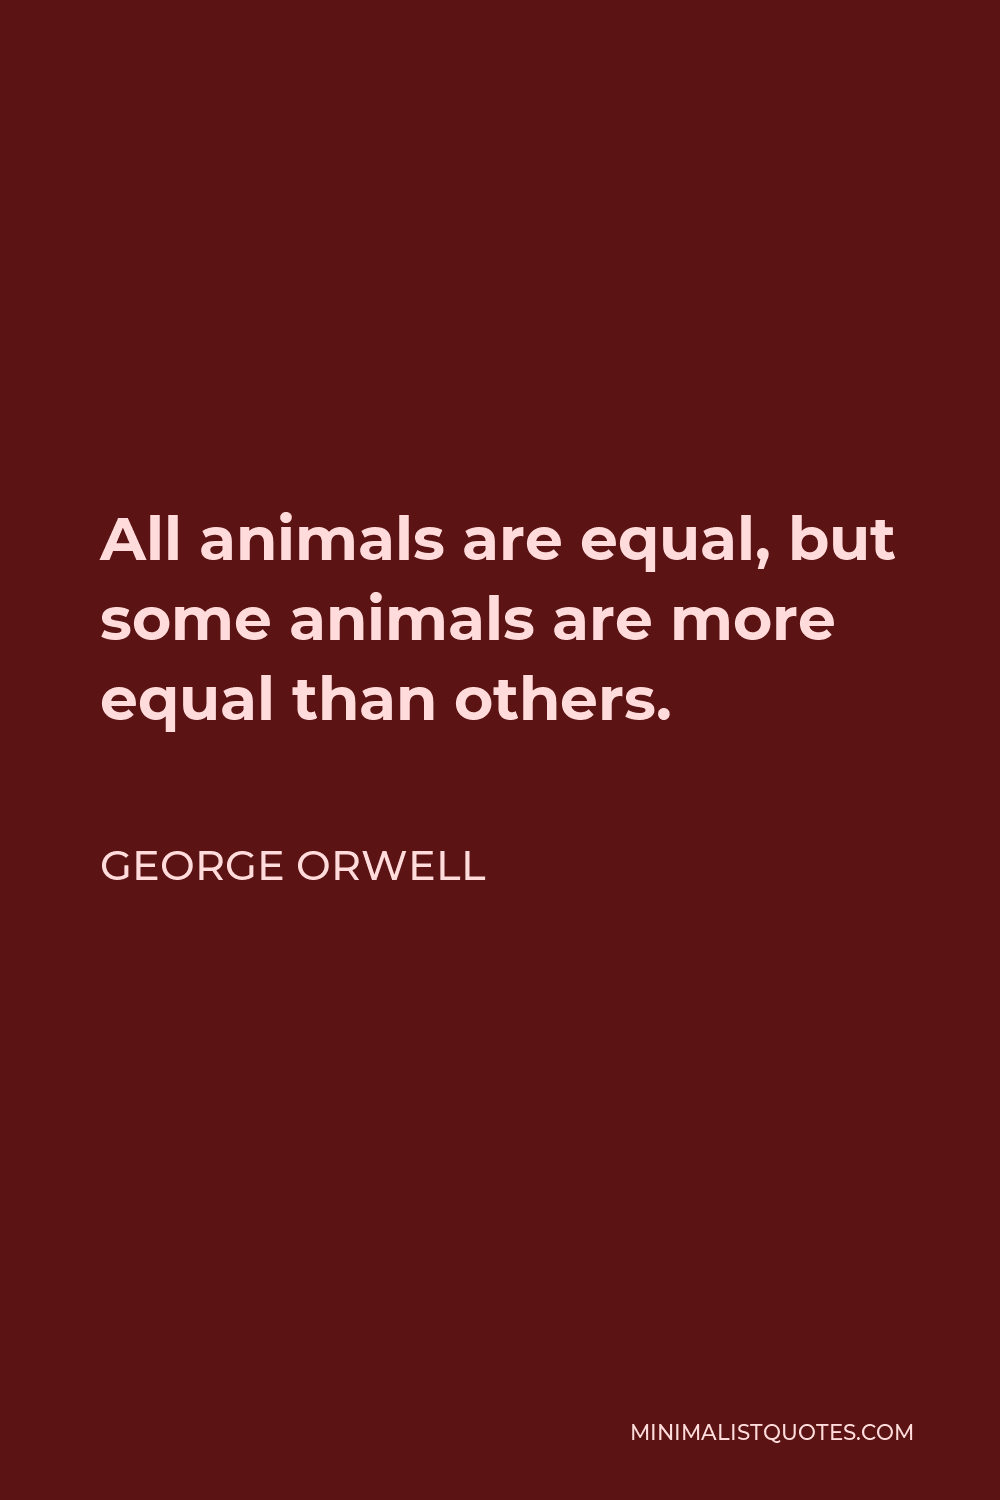 George Orwell Quote: All animals are equal, but some animals are more equal  than others.